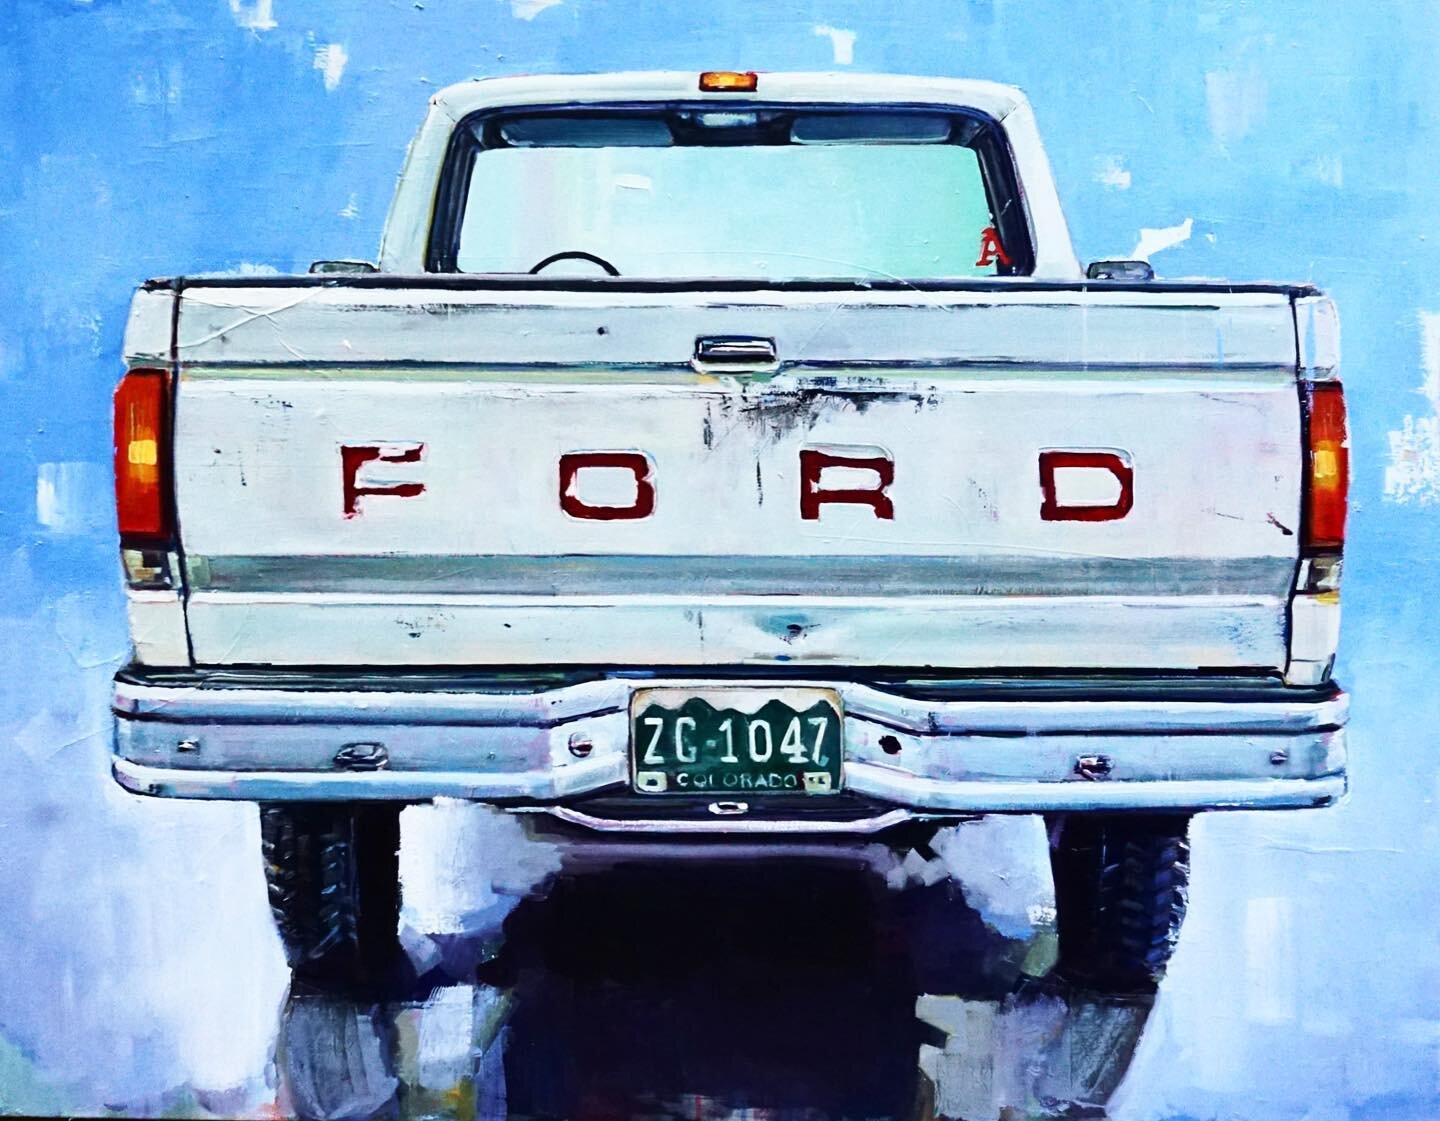 F-150, 36x48. Oil on canvas. Prepping for shipment!! 
.
.
This is the first truck I remember my dad having when I was just a wee babe. I have many memories in the back of this bad boy. 
.
This show is gonna be epic. This body off work feels strong an